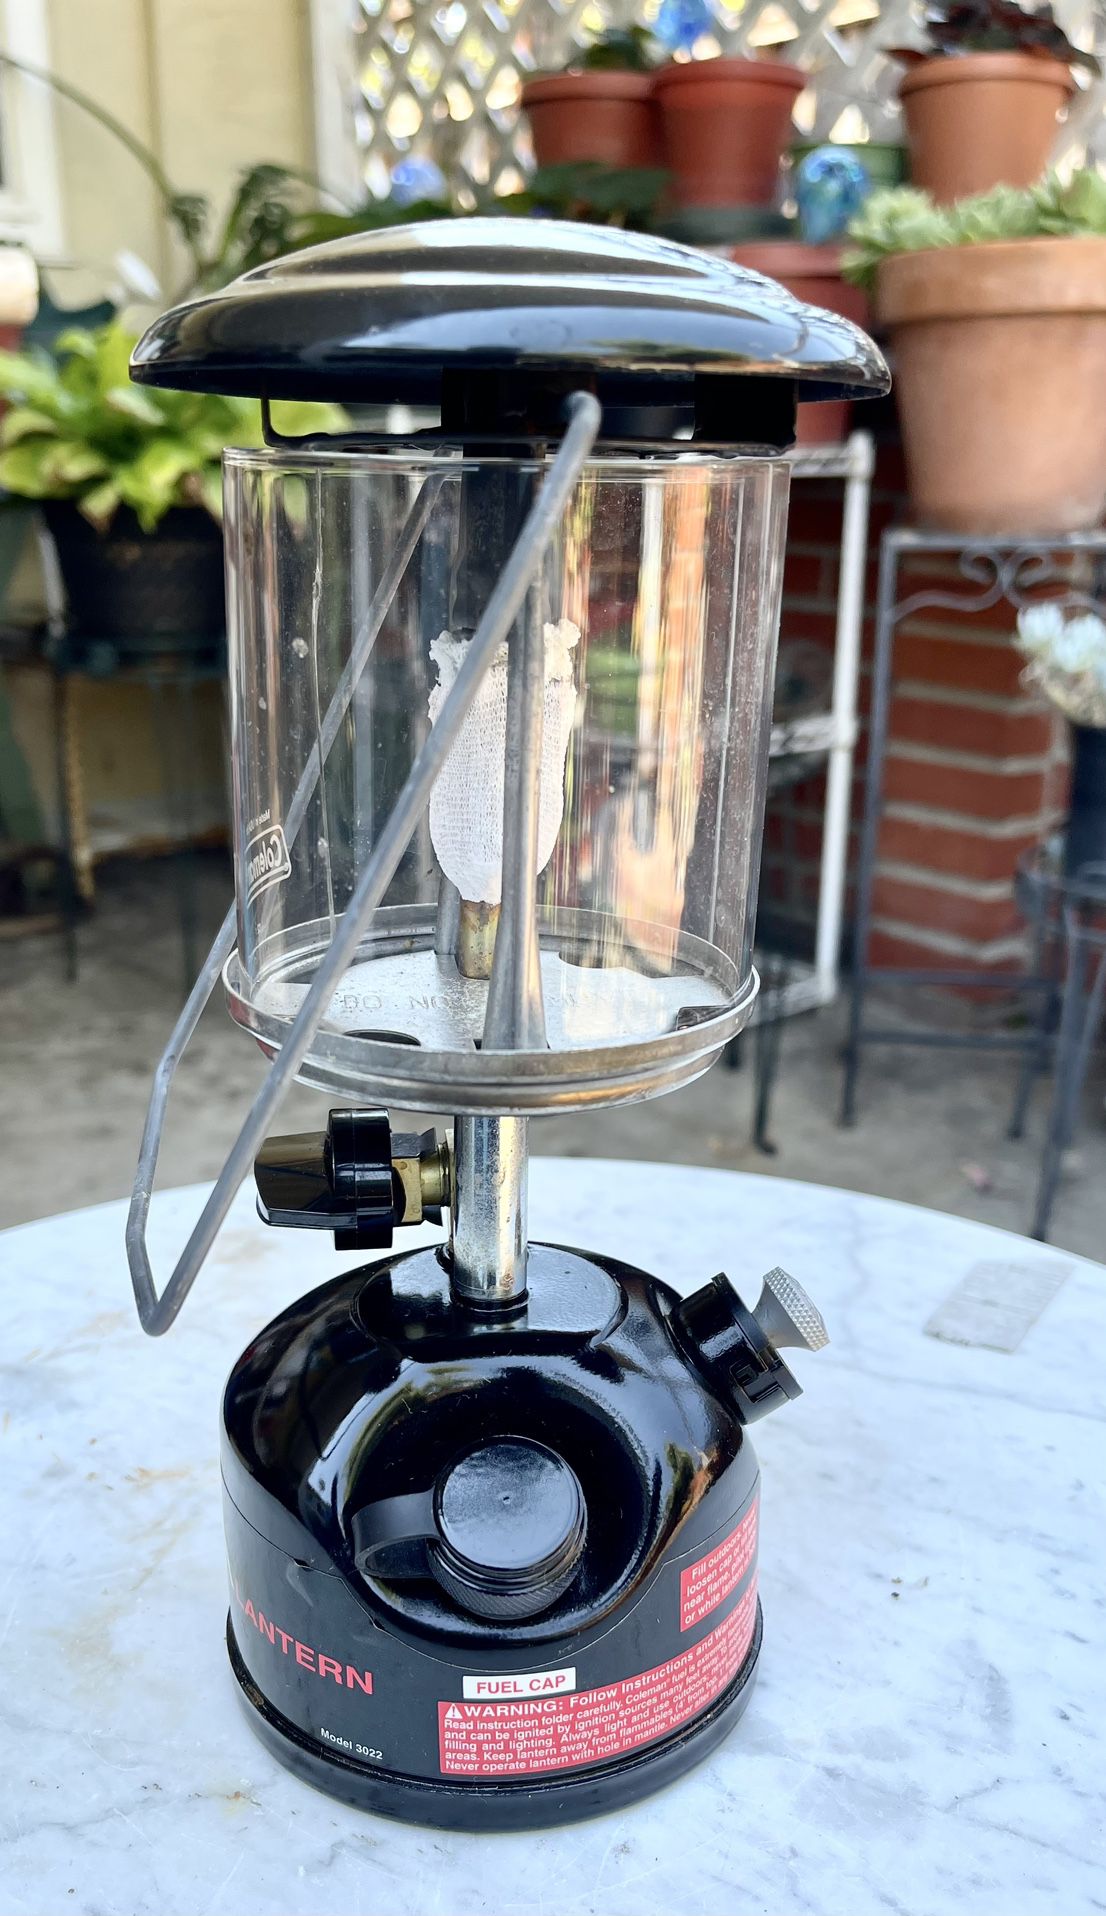 Coleman Camping Lantern for Sale in Riverside, CA - OfferUp